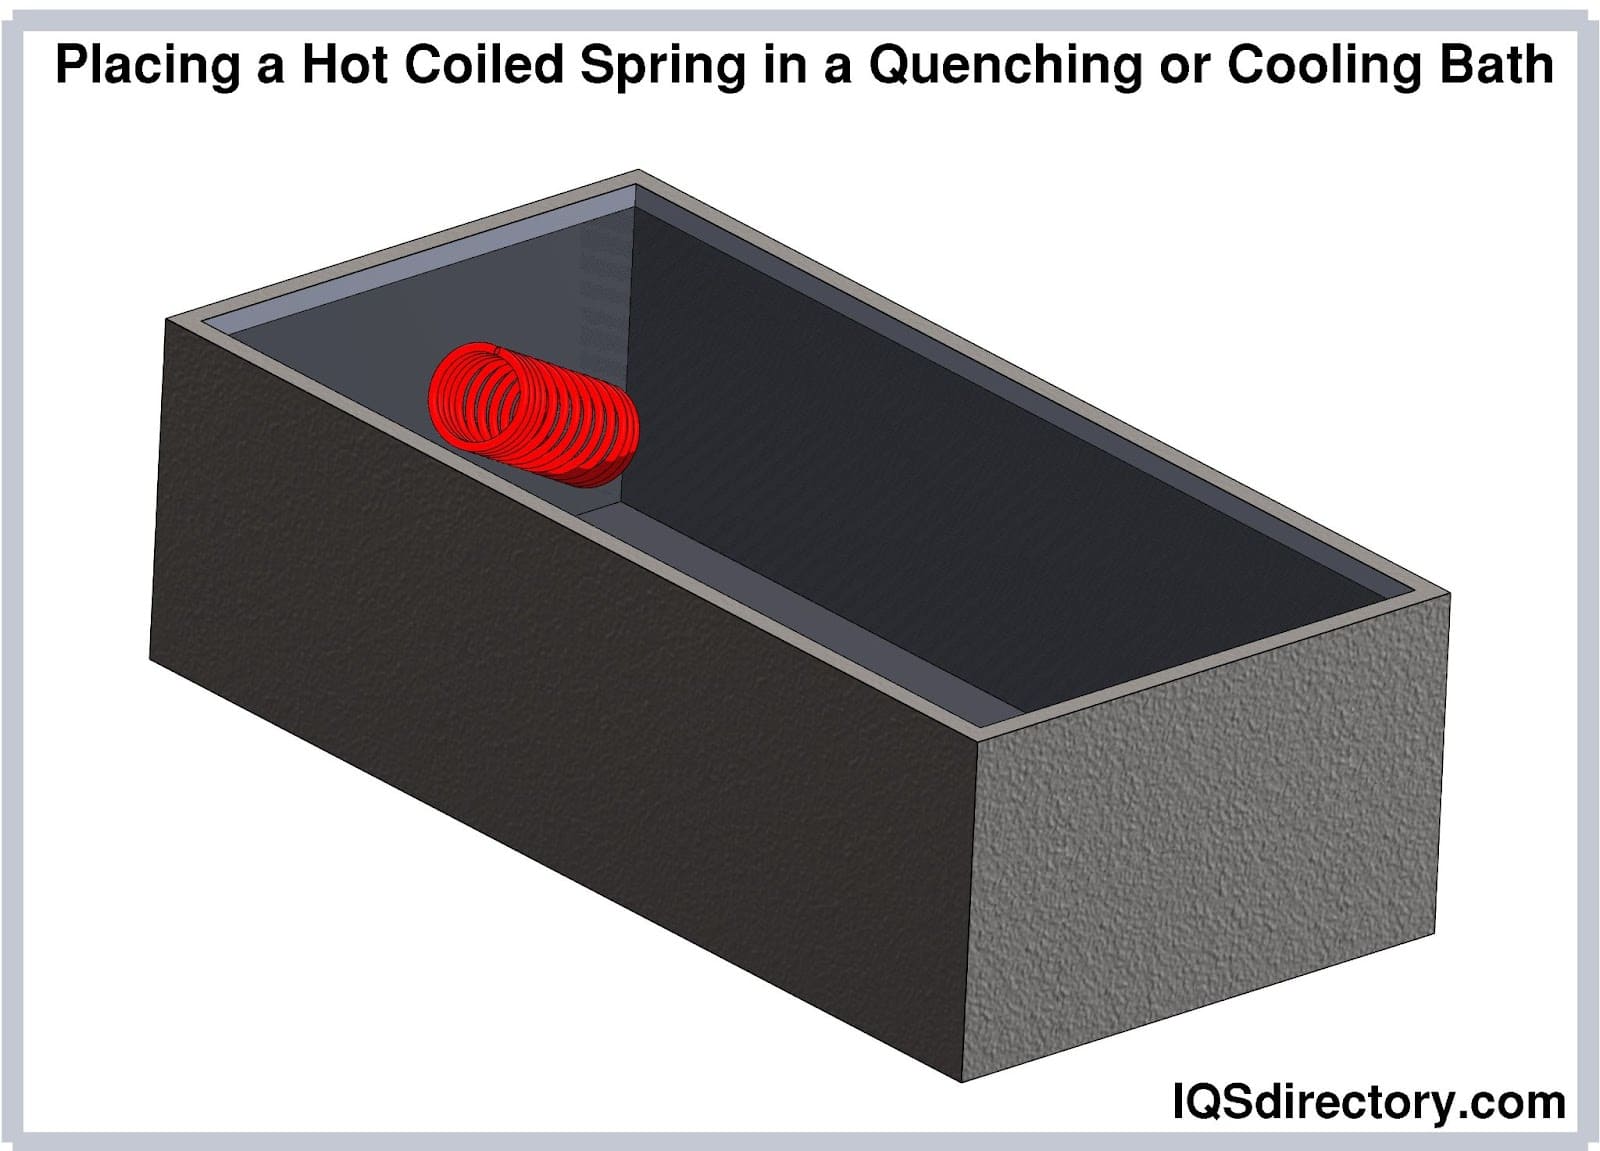 Placing a Hot Coiled Spring in a Quenching or Cooling Bath